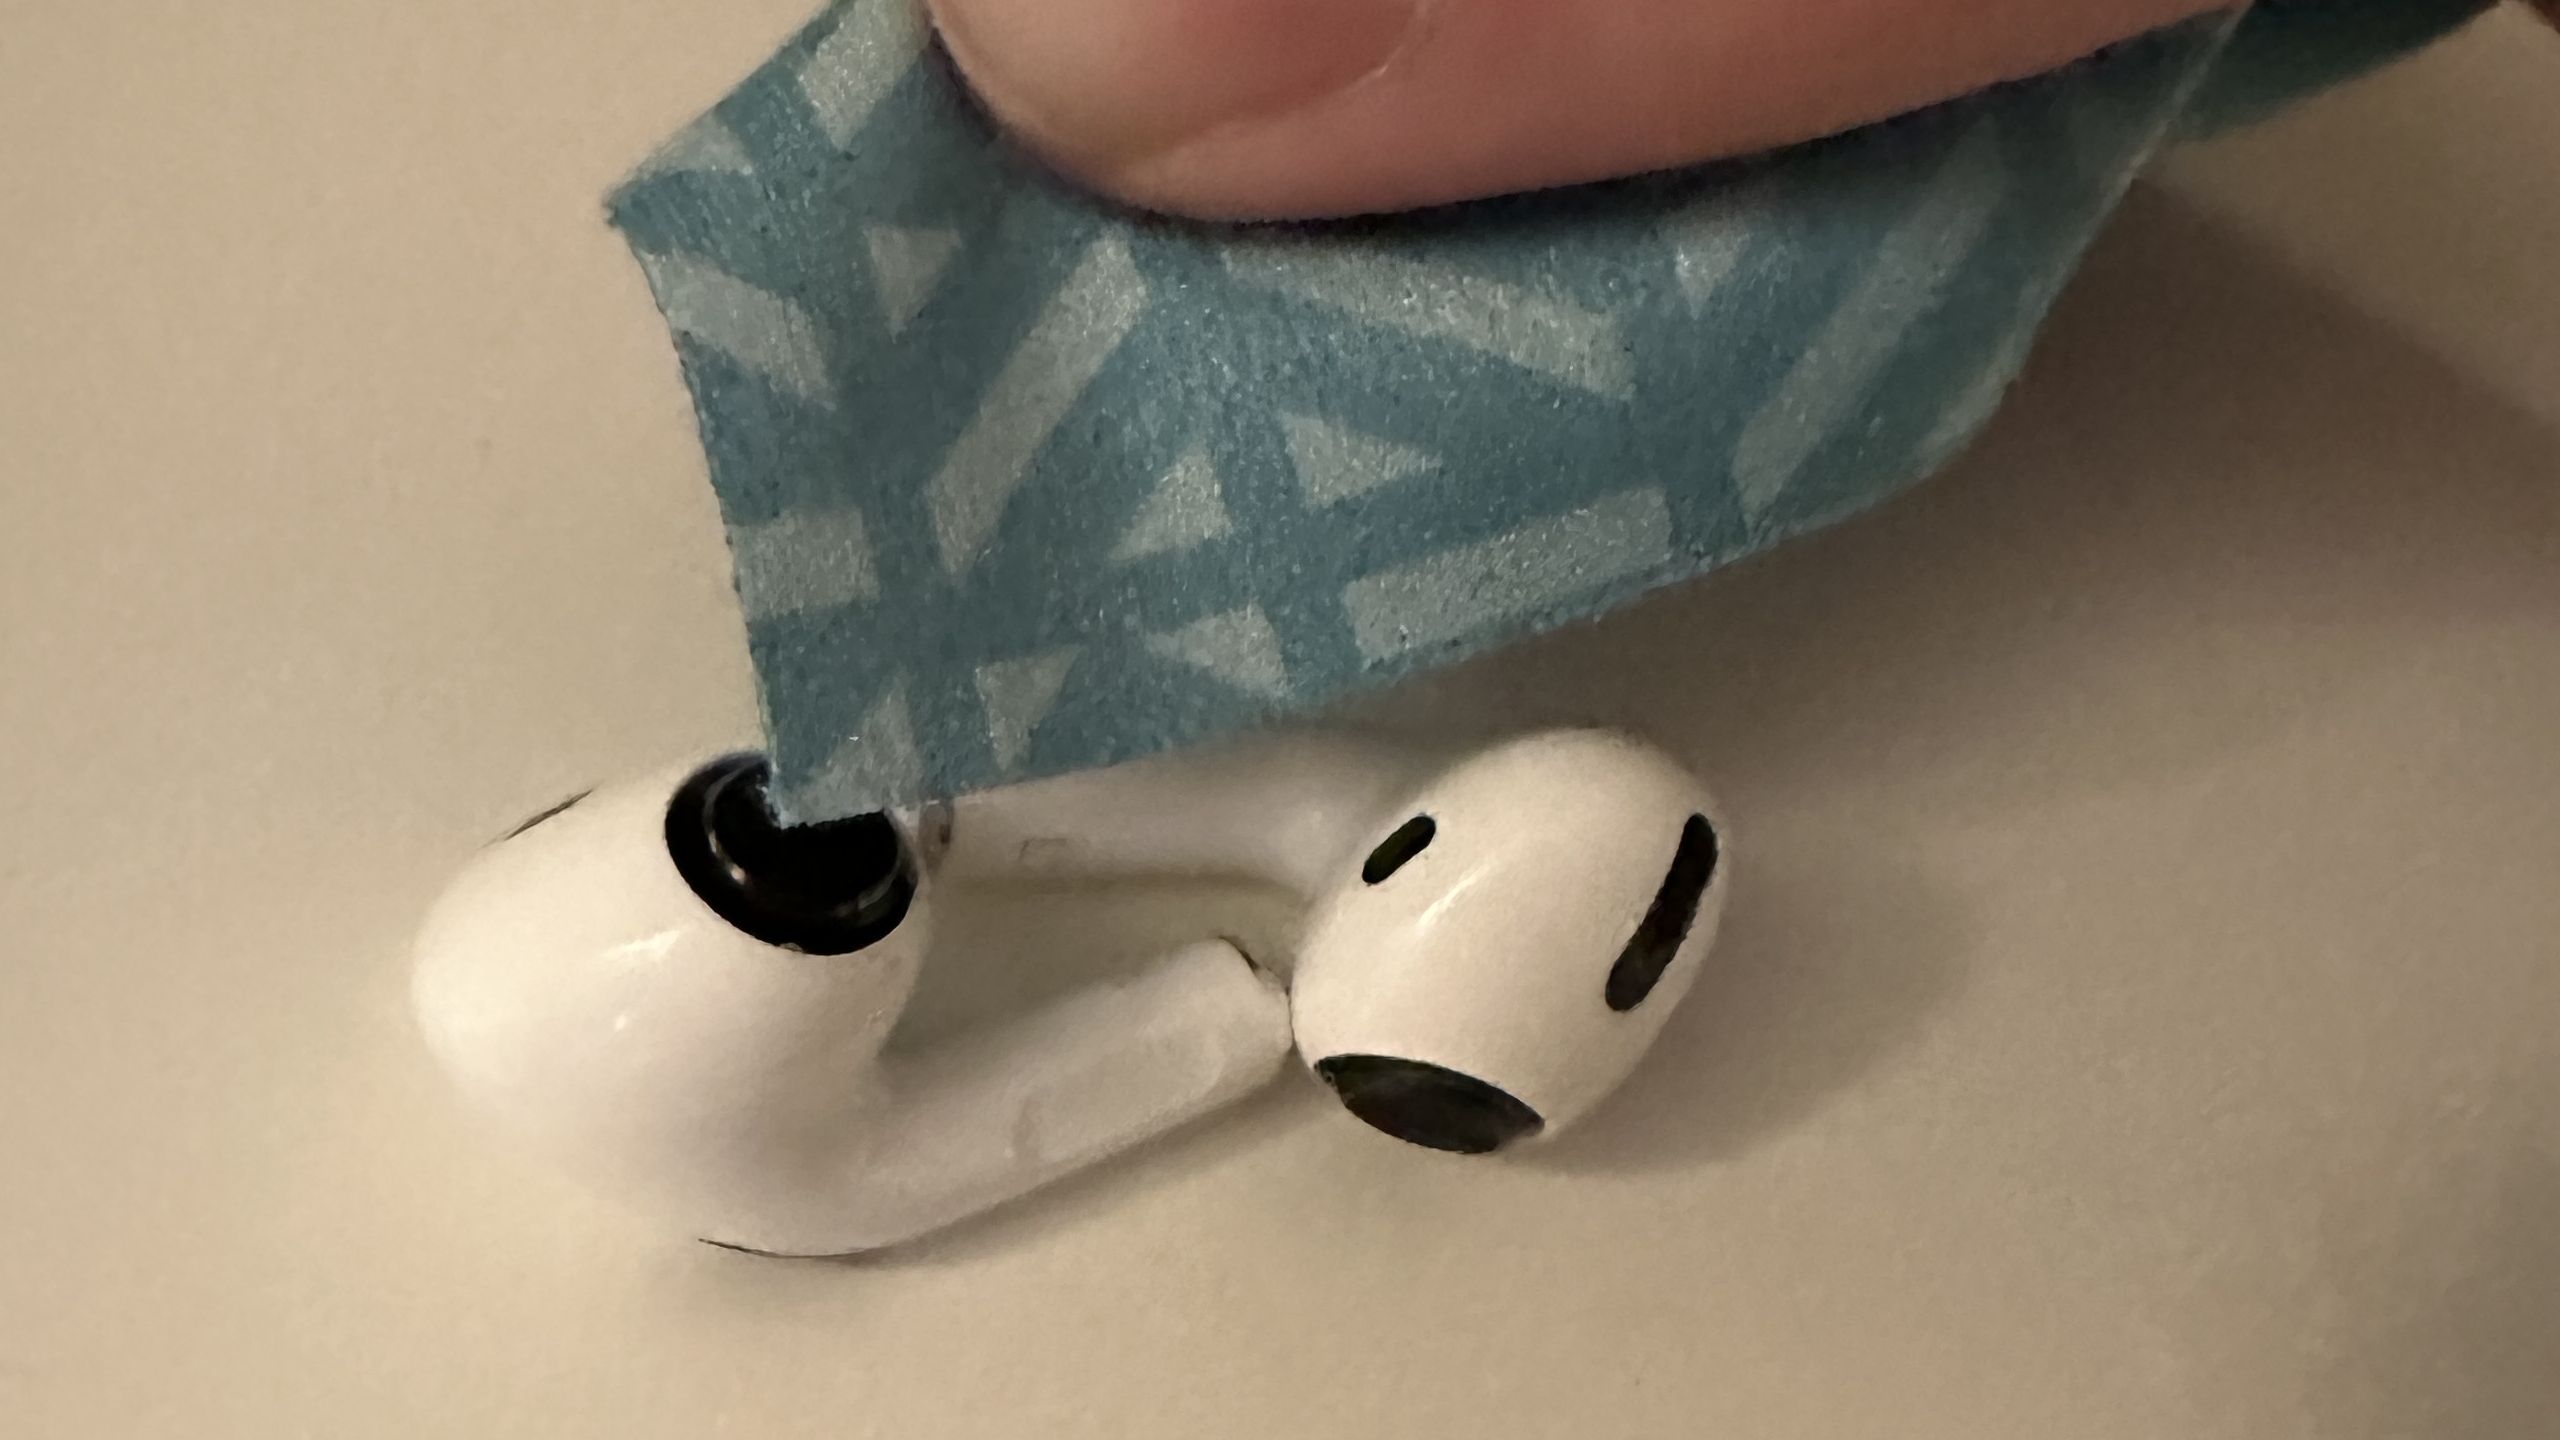 Cleaning a pair of AirPods Pro